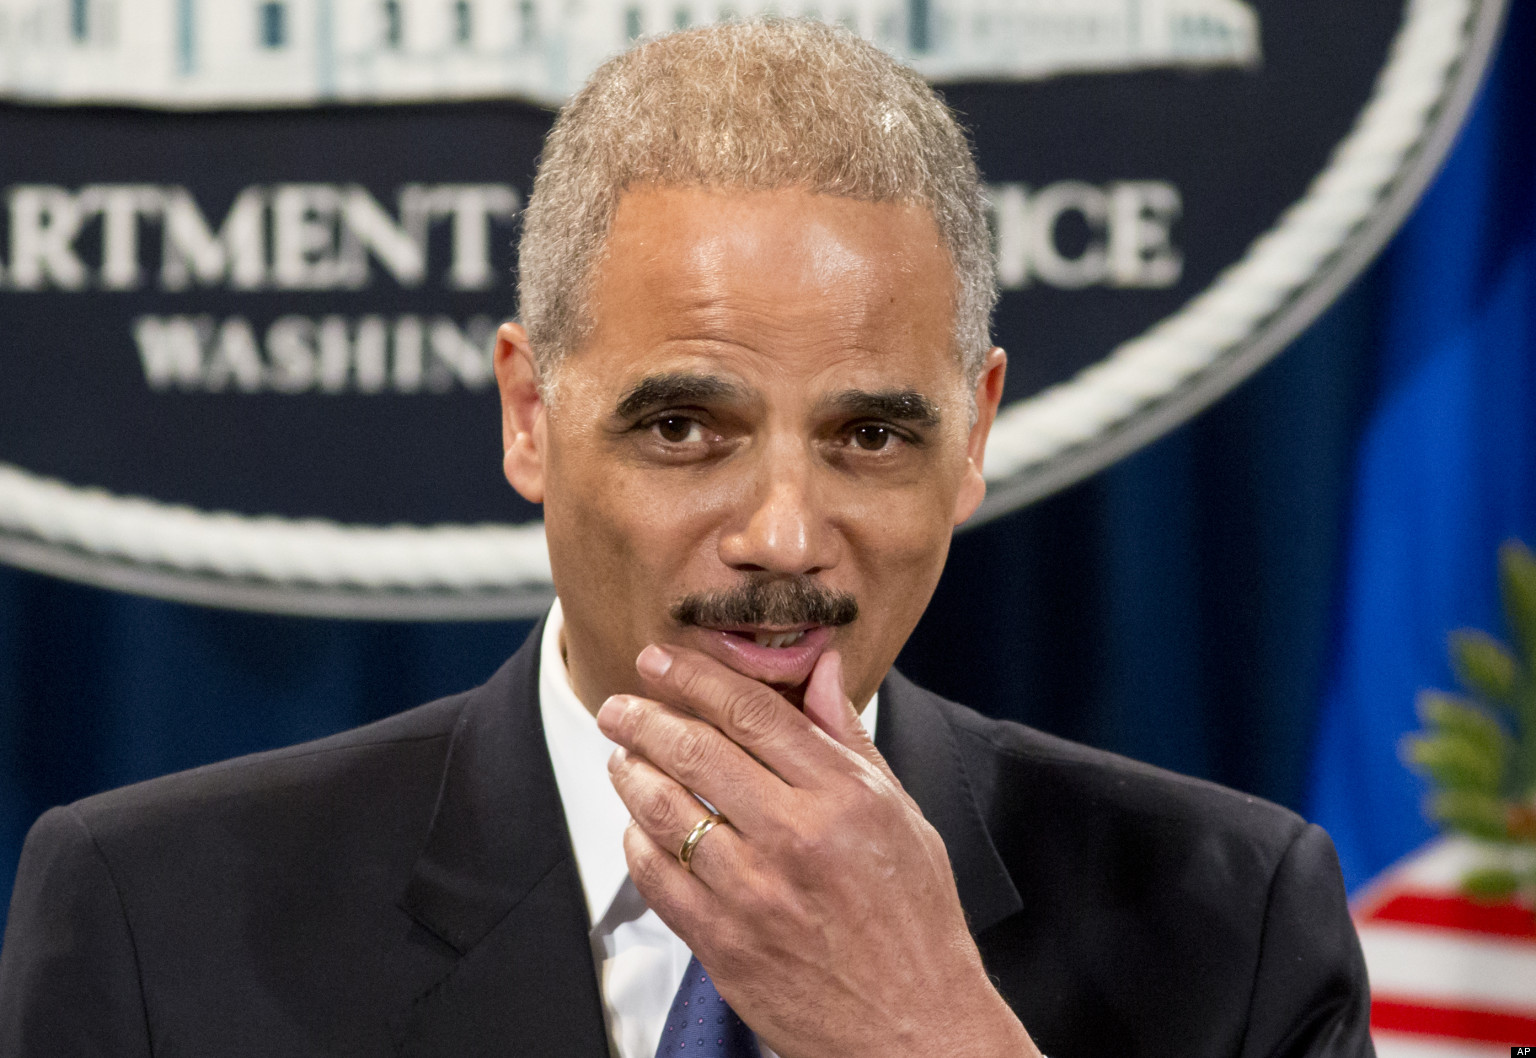 Eric Holder covers-up Russia scandal